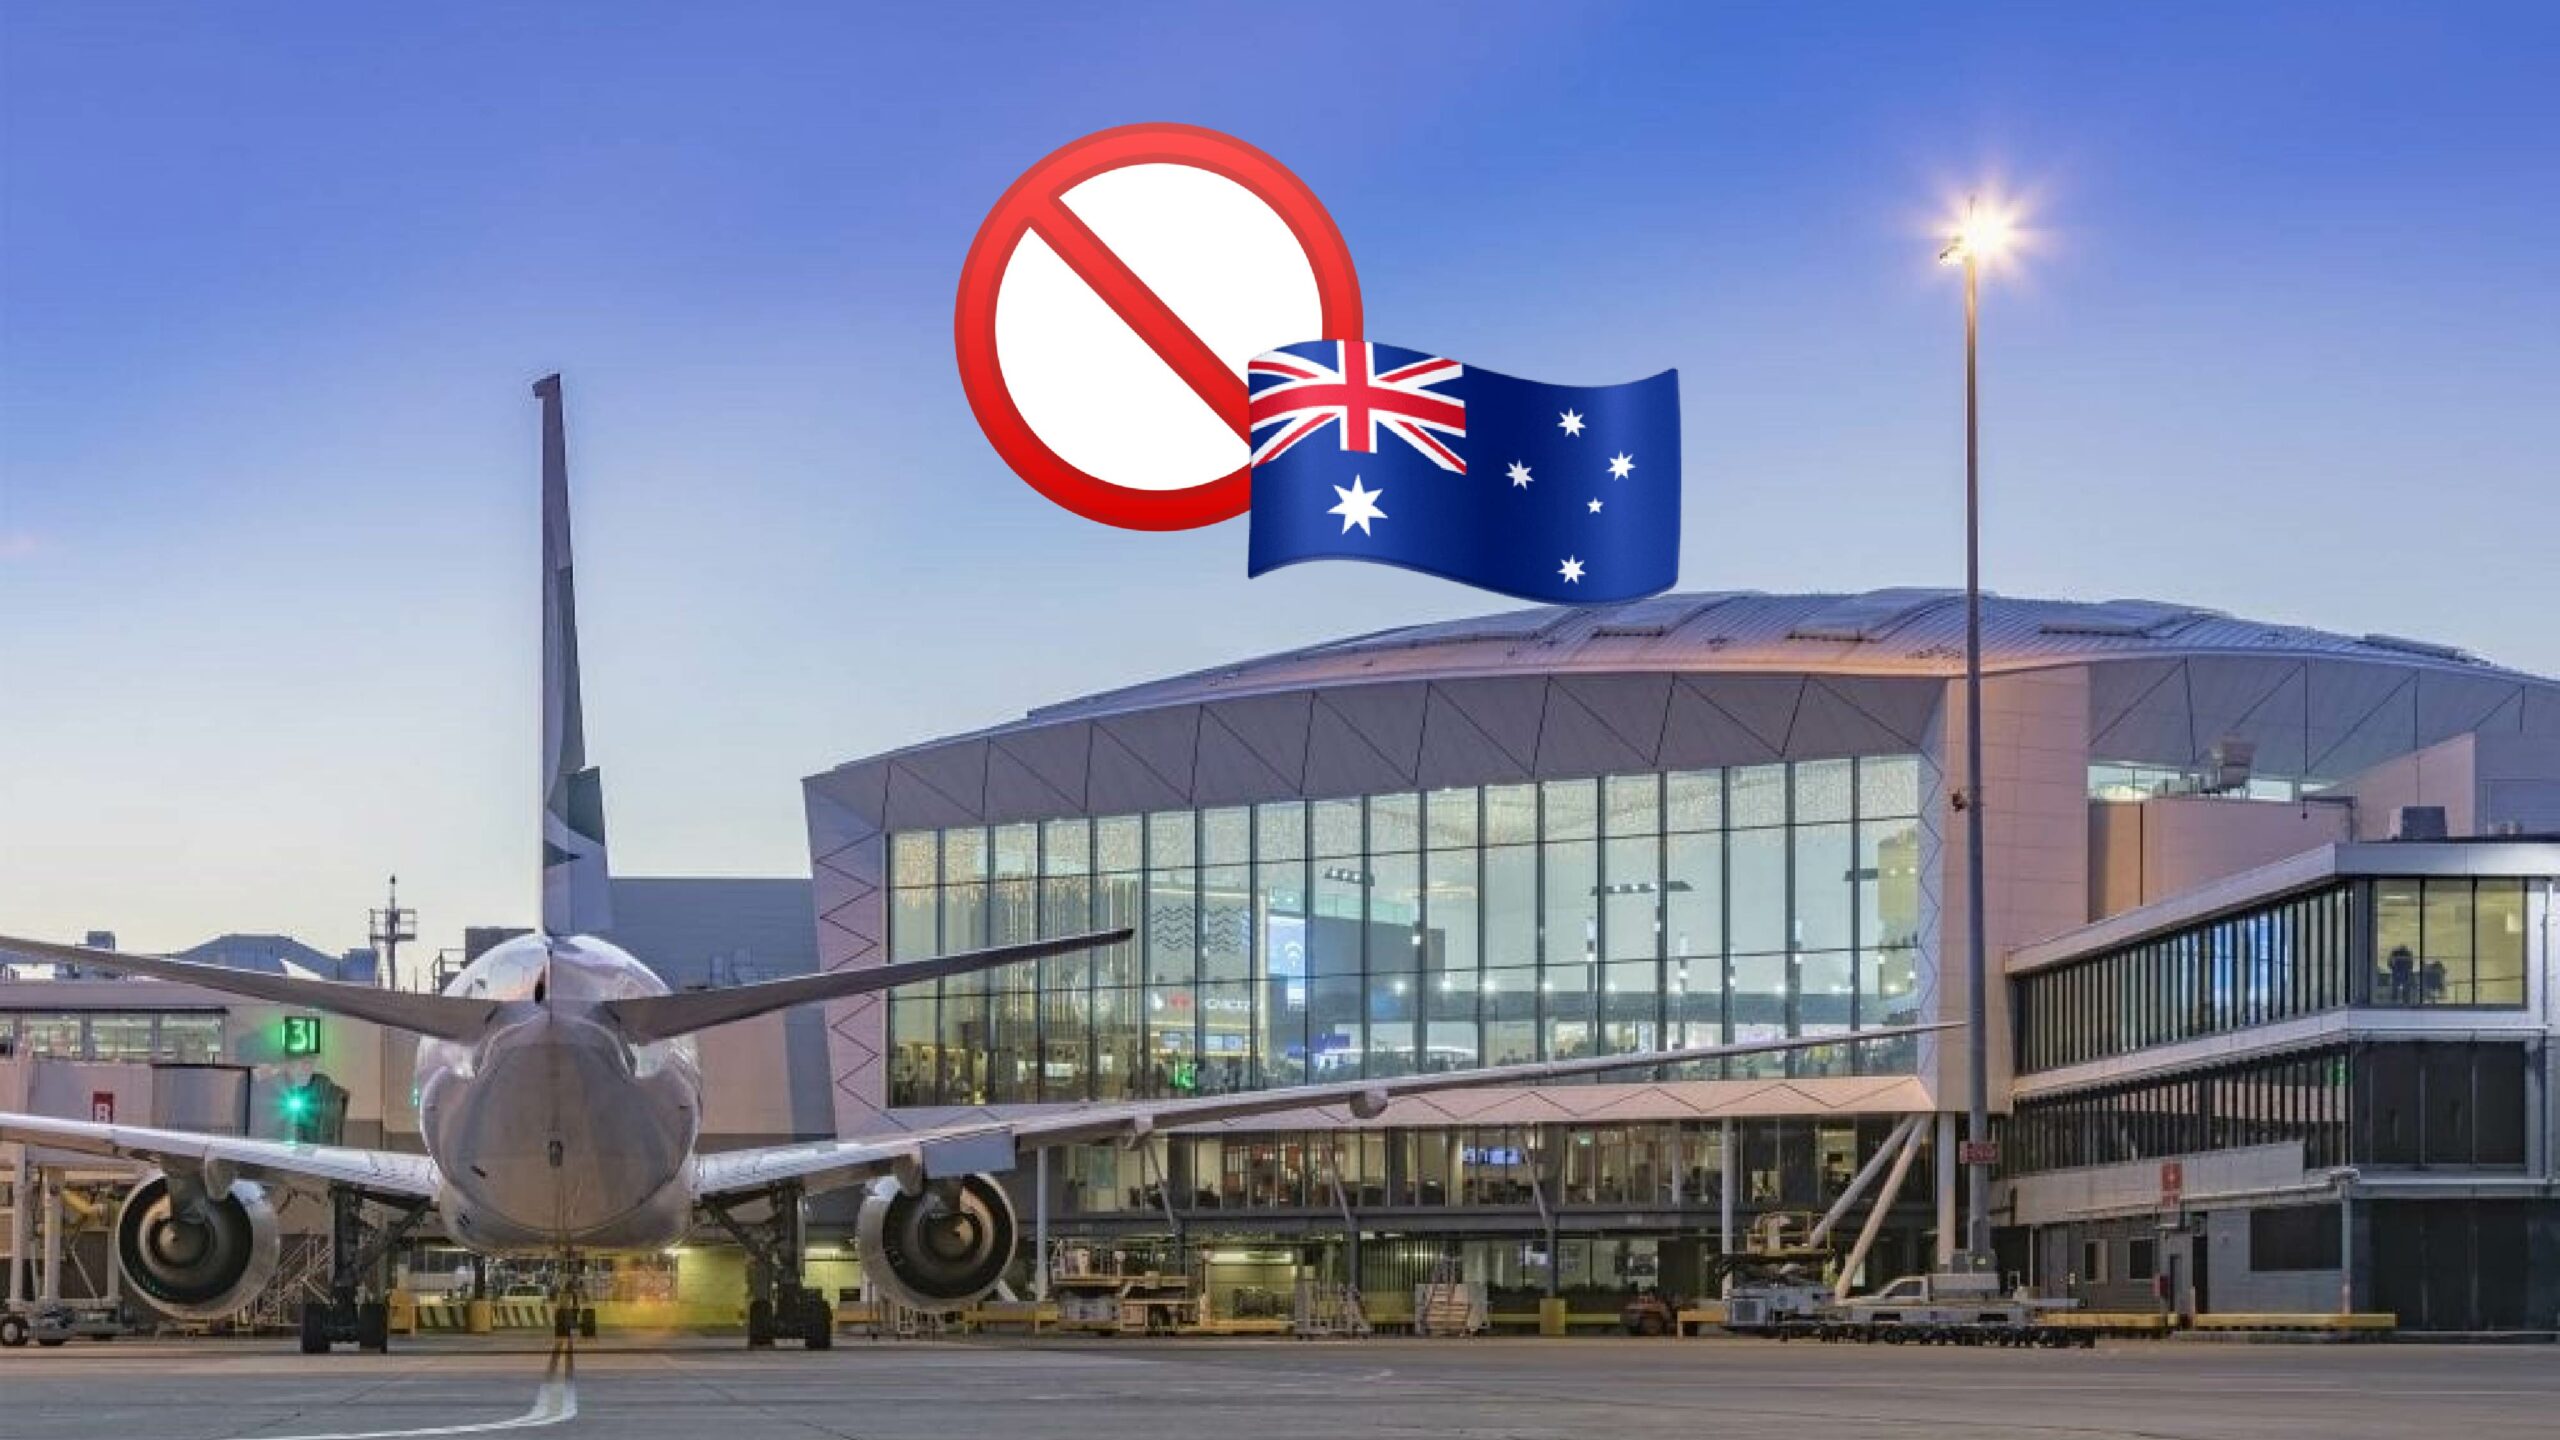 Australia banning arrivals from India; offenders to face prison time & fines